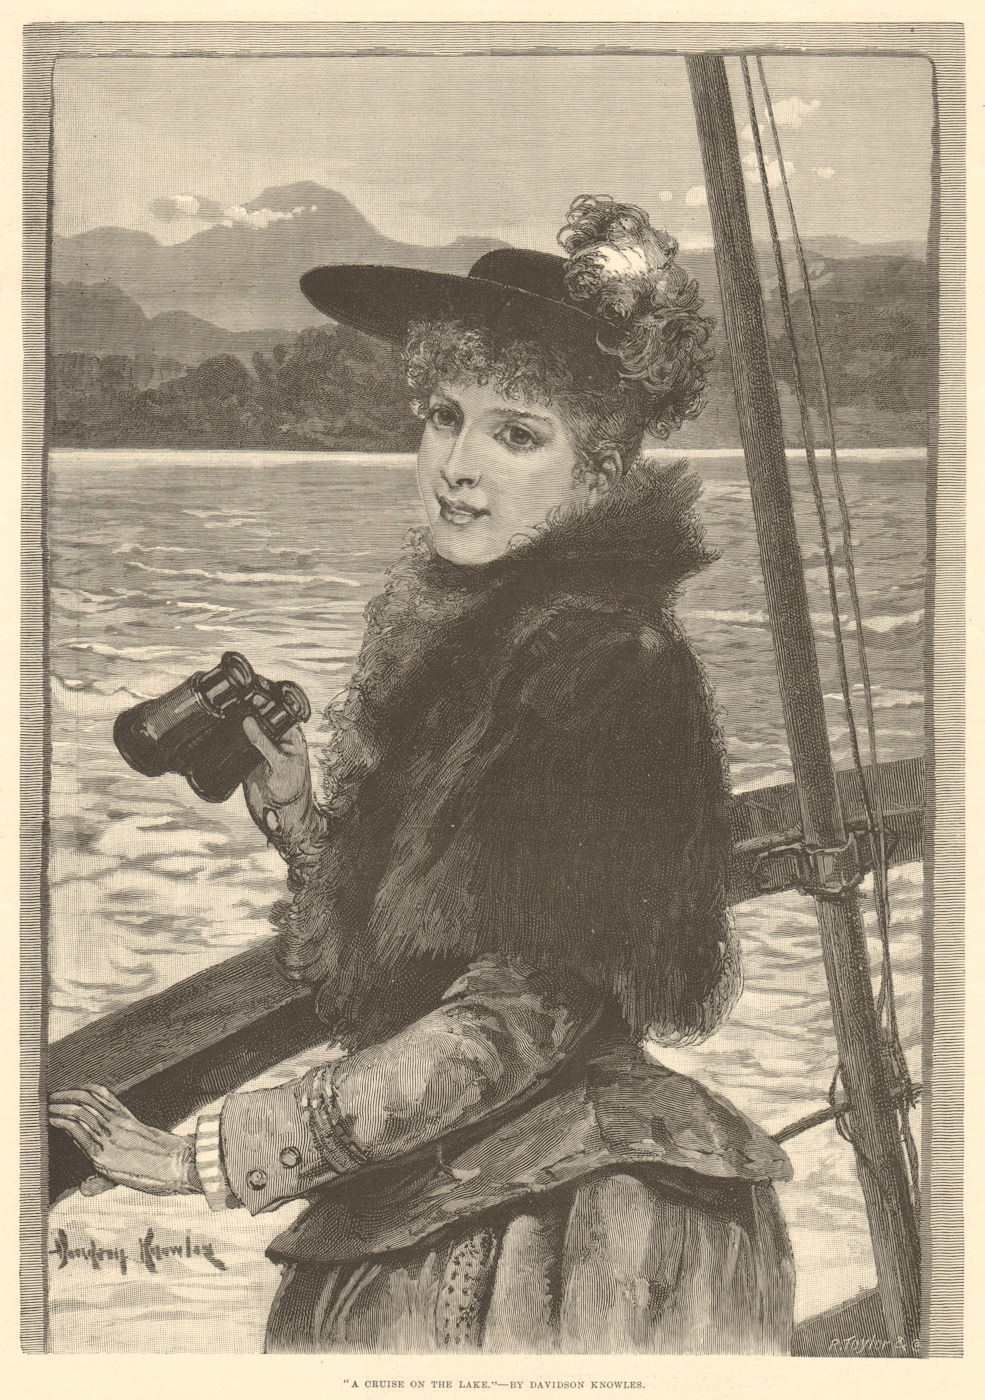 Associate Product "A cruise on the lake", by Davidson Knowles. Pretty Ladies 1891 old print